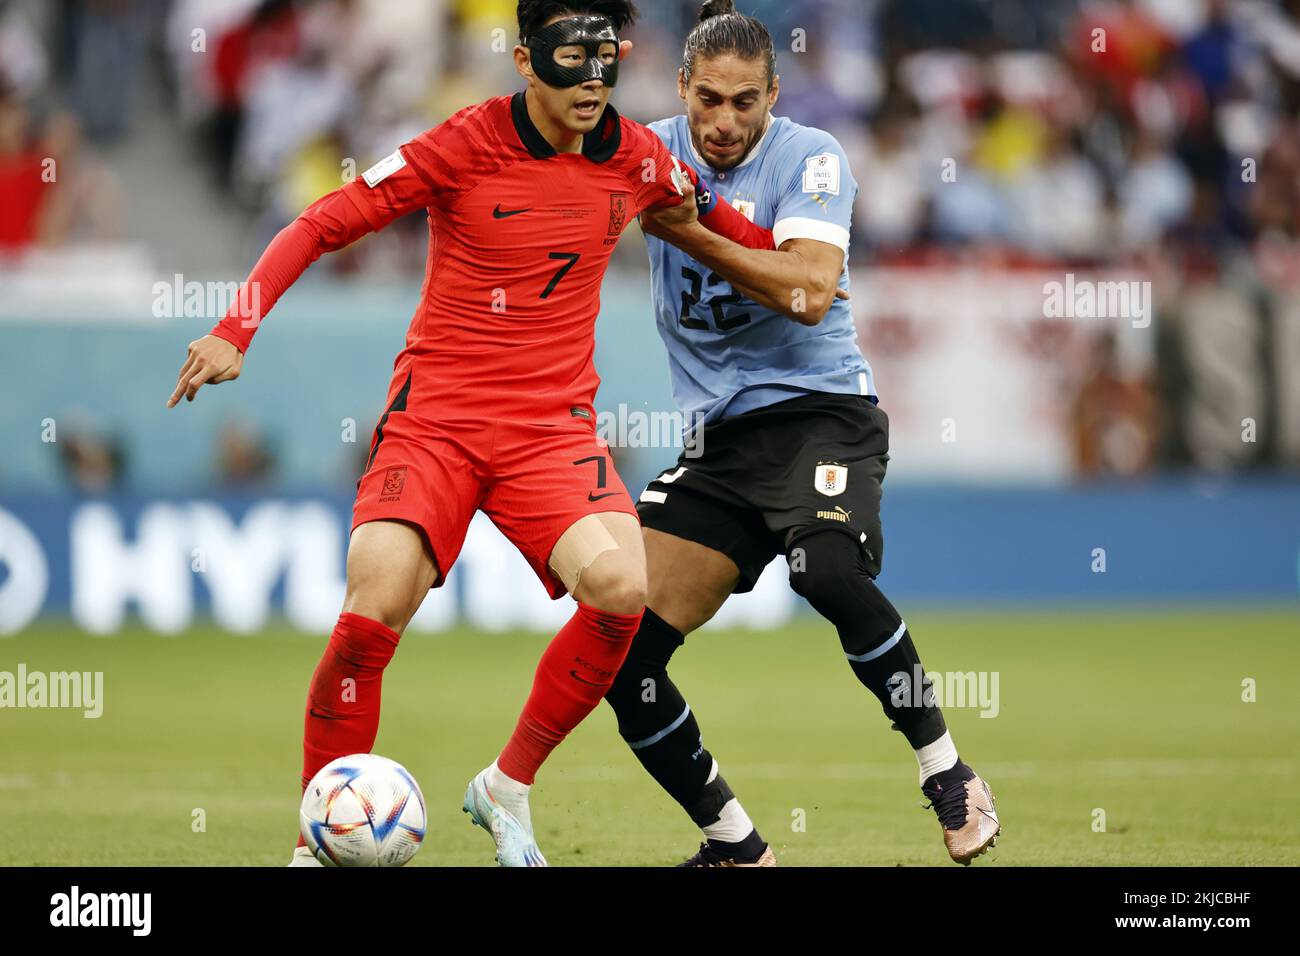 DOHA - (l-r) Heung-min Son of Korea Republic, Martin Caceres of Uruguay during the FIFA World Cup Qatar 2022 group H match between Uruguay and South Korea at Education City Stadium on November 24, 2022 in Doha, Qatar. AP | Dutch Height | MAURICE OF STONE Credit: ANP/Alamy Live News Stock Photo